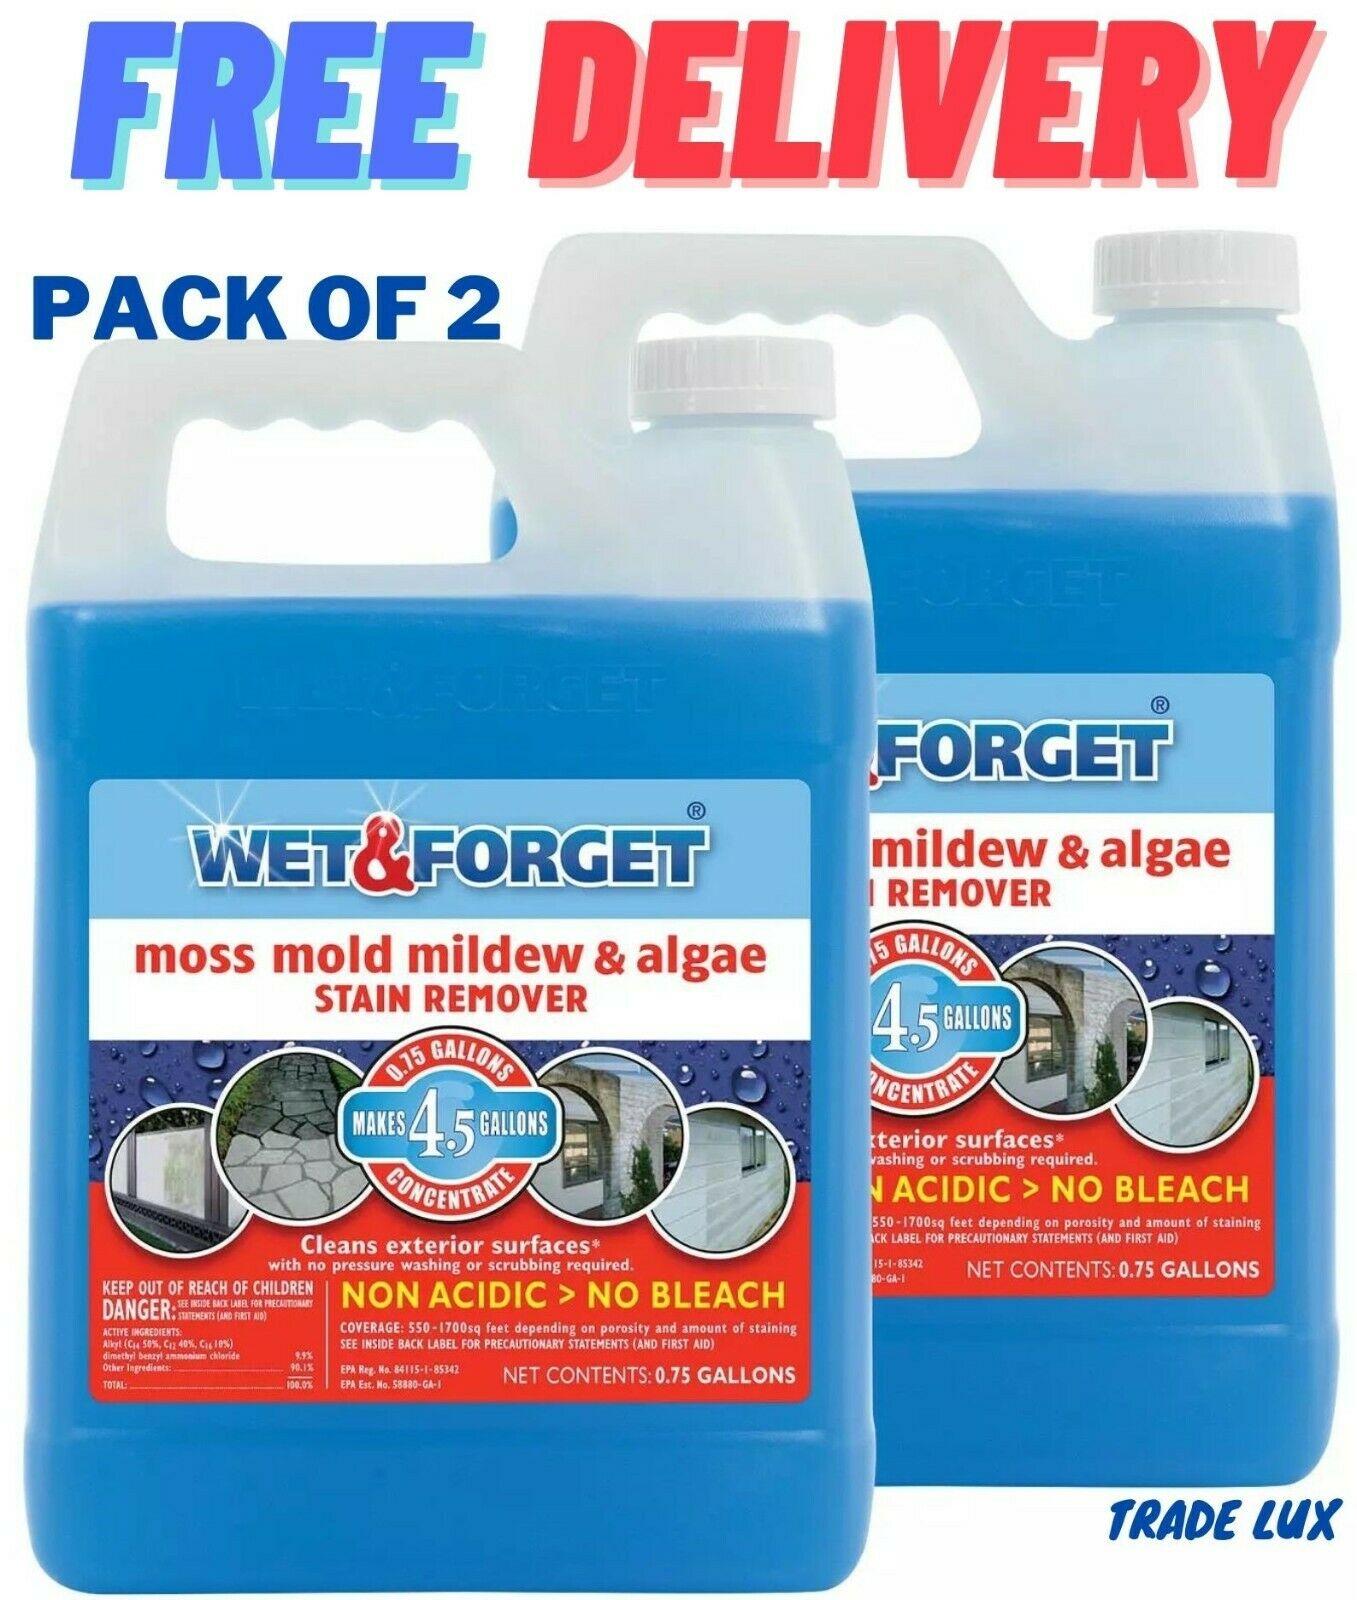 Wet & Forget Moss Mold And Mildew Algae Stain Remover .75 Gallon 2 Pack